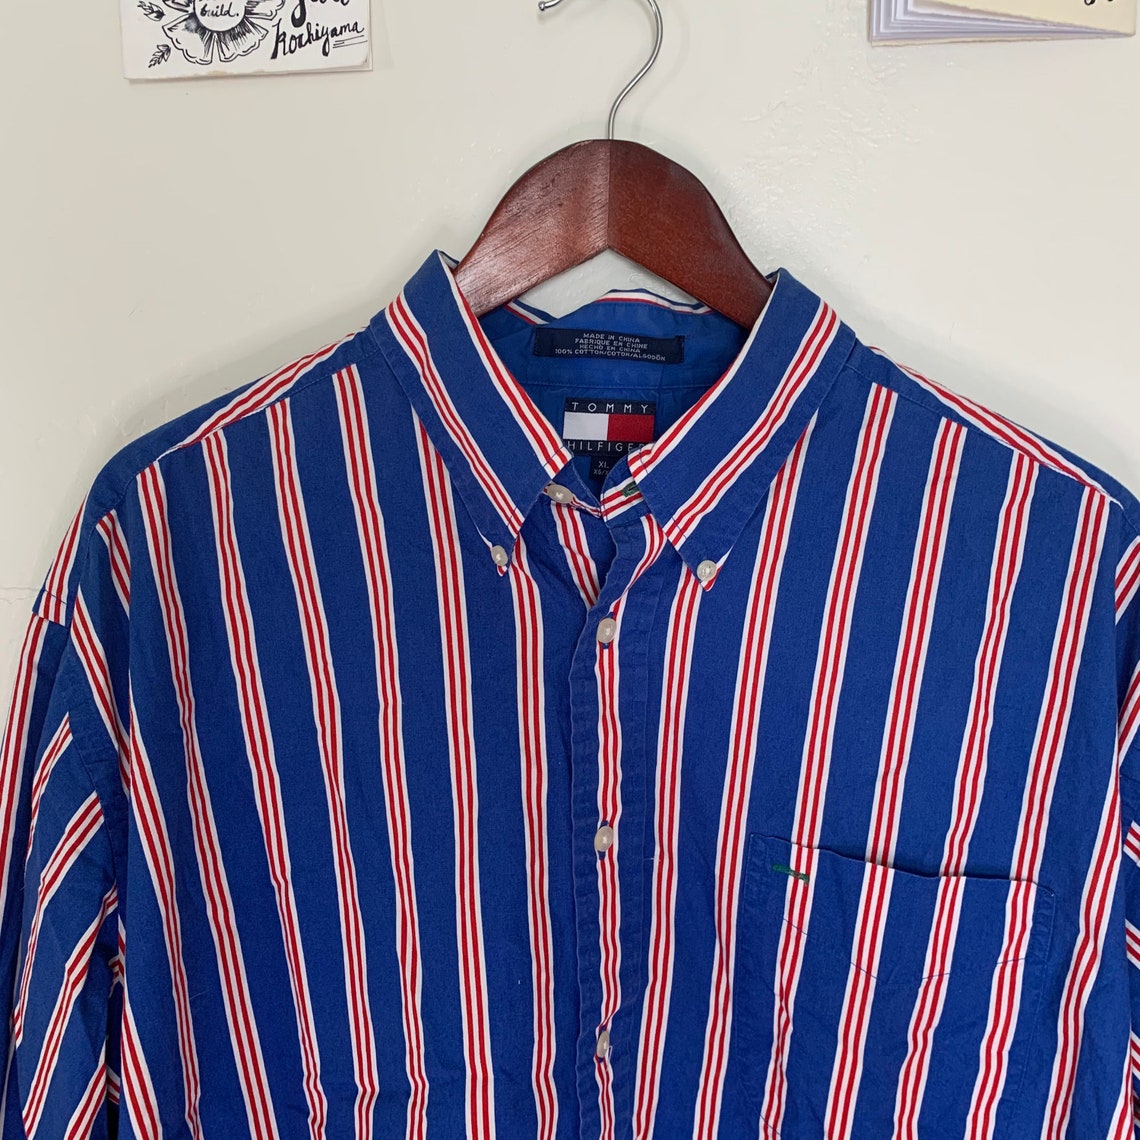 90s Tommy Hilfiger Red White and Blue Vertical Striped | Etsy